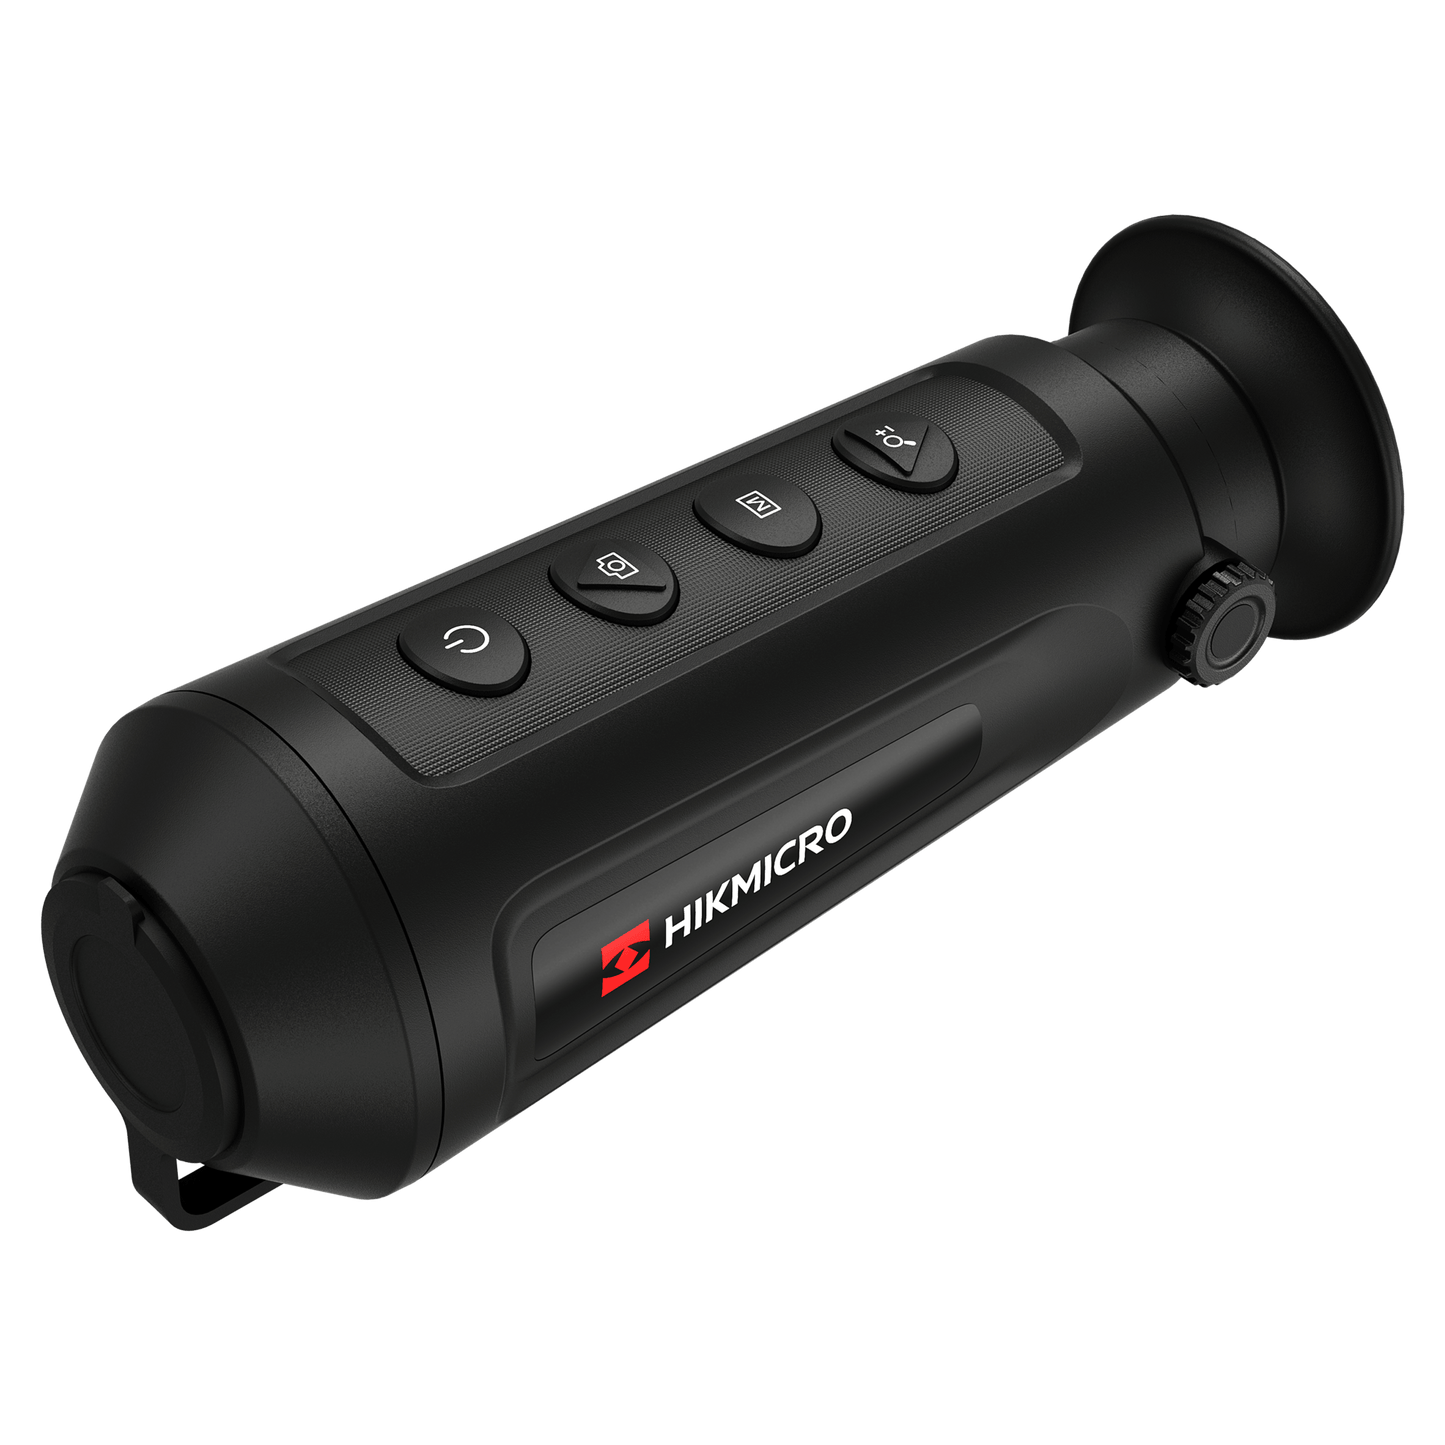 Cape Thermal - The best thermal imaging monoculars for sale - HikMicro LYNX Pro LE10 Handheld thermal imaging monocular - Left Hand Side View